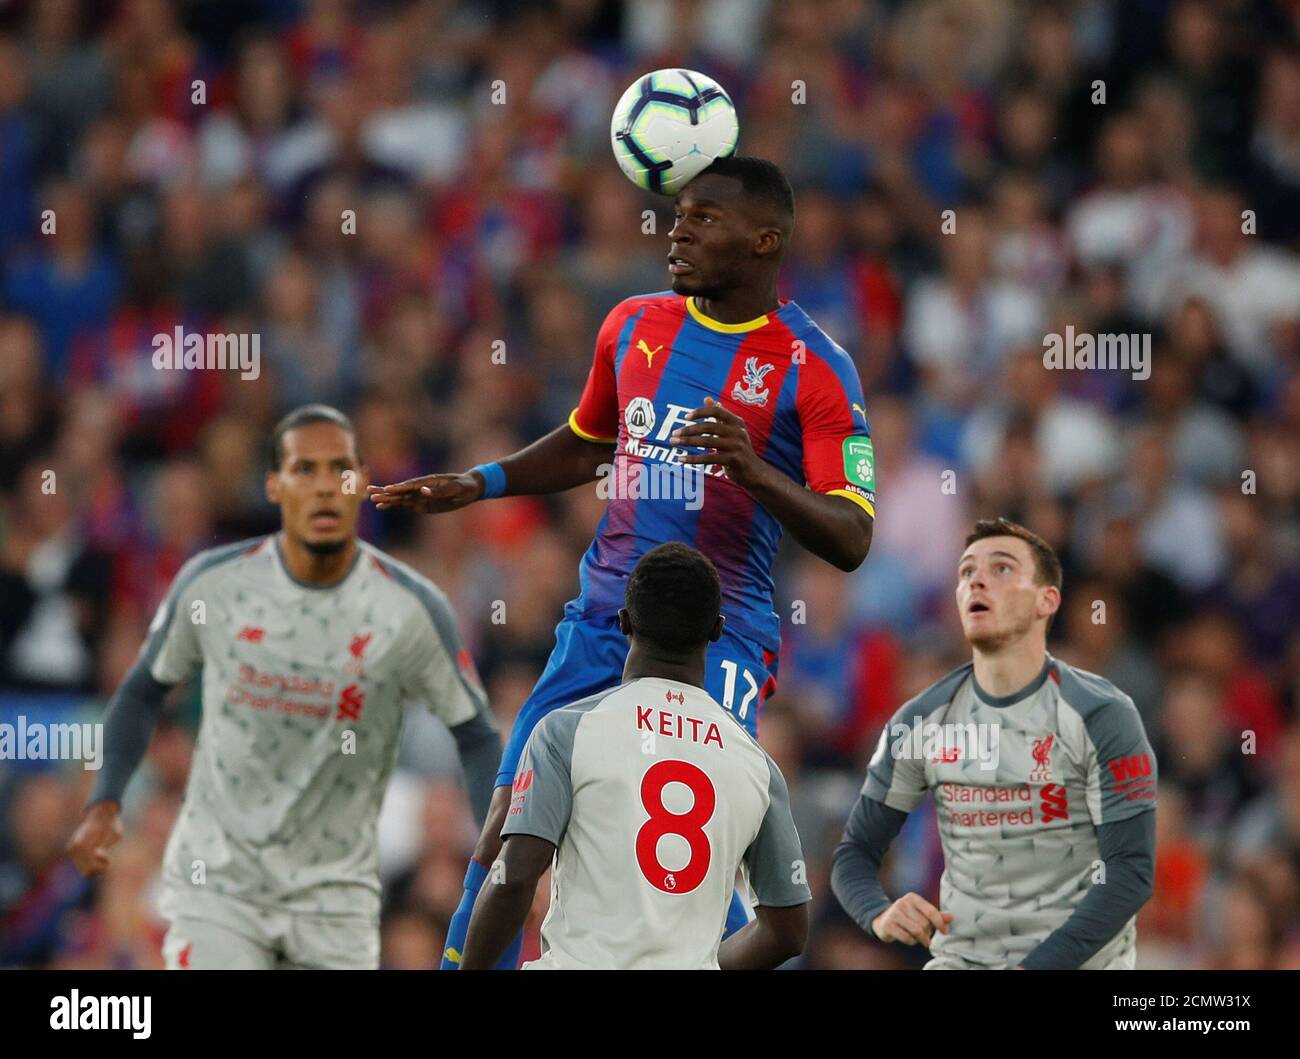 Soccer Football - Premier League - Crystal Palace v Liverpool - Selhurst Park, London, Britain - August 20, 2018  Crystal Palace's Christian Benteke in action           Action Images via Reuters/John Sibley  EDITORIAL USE ONLY. No use with unauthorized audio, video, data, fixture lists, club/league logos or 'live' services. Online in-match use limited to 75 images, no video emulation. No use in betting, games or single club/league/player publications.  Please contact your account representative for further details. Stock Photo